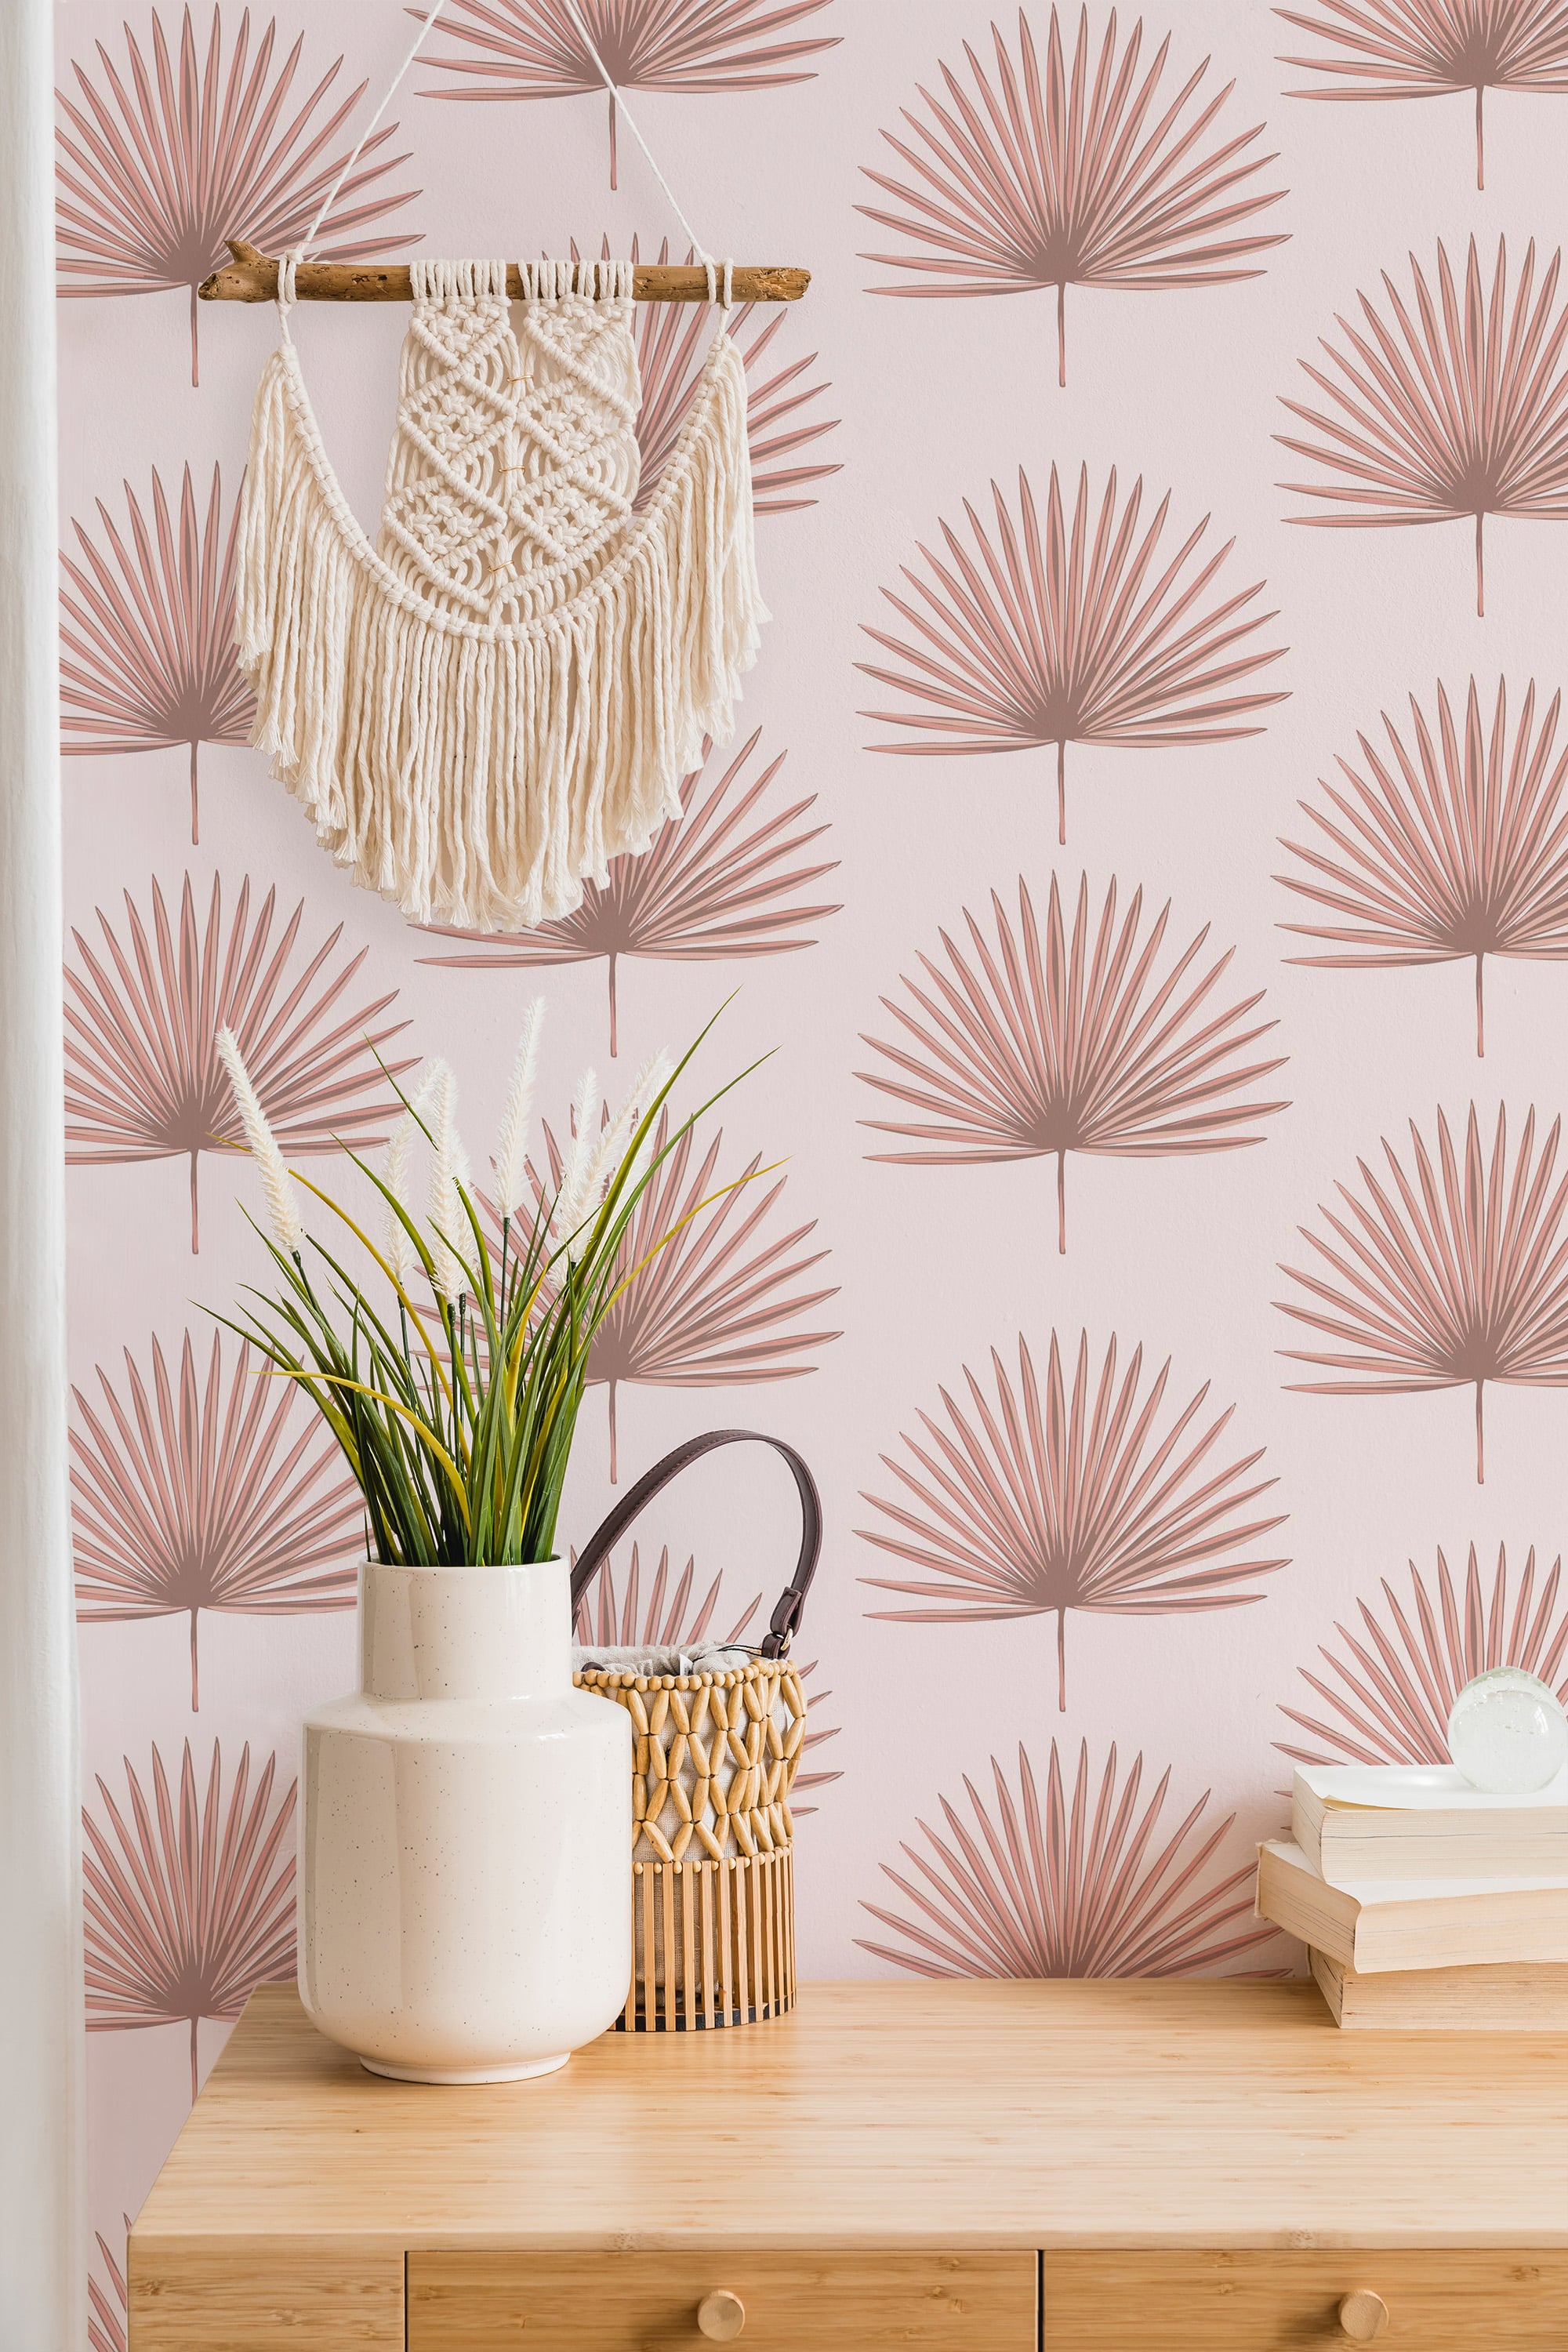 Wallpaper Palm Leaves Peel and Stick Removable or Traditional  Etsy   Wallpaper living room Room wallpaper Pink wallpaper bedroom